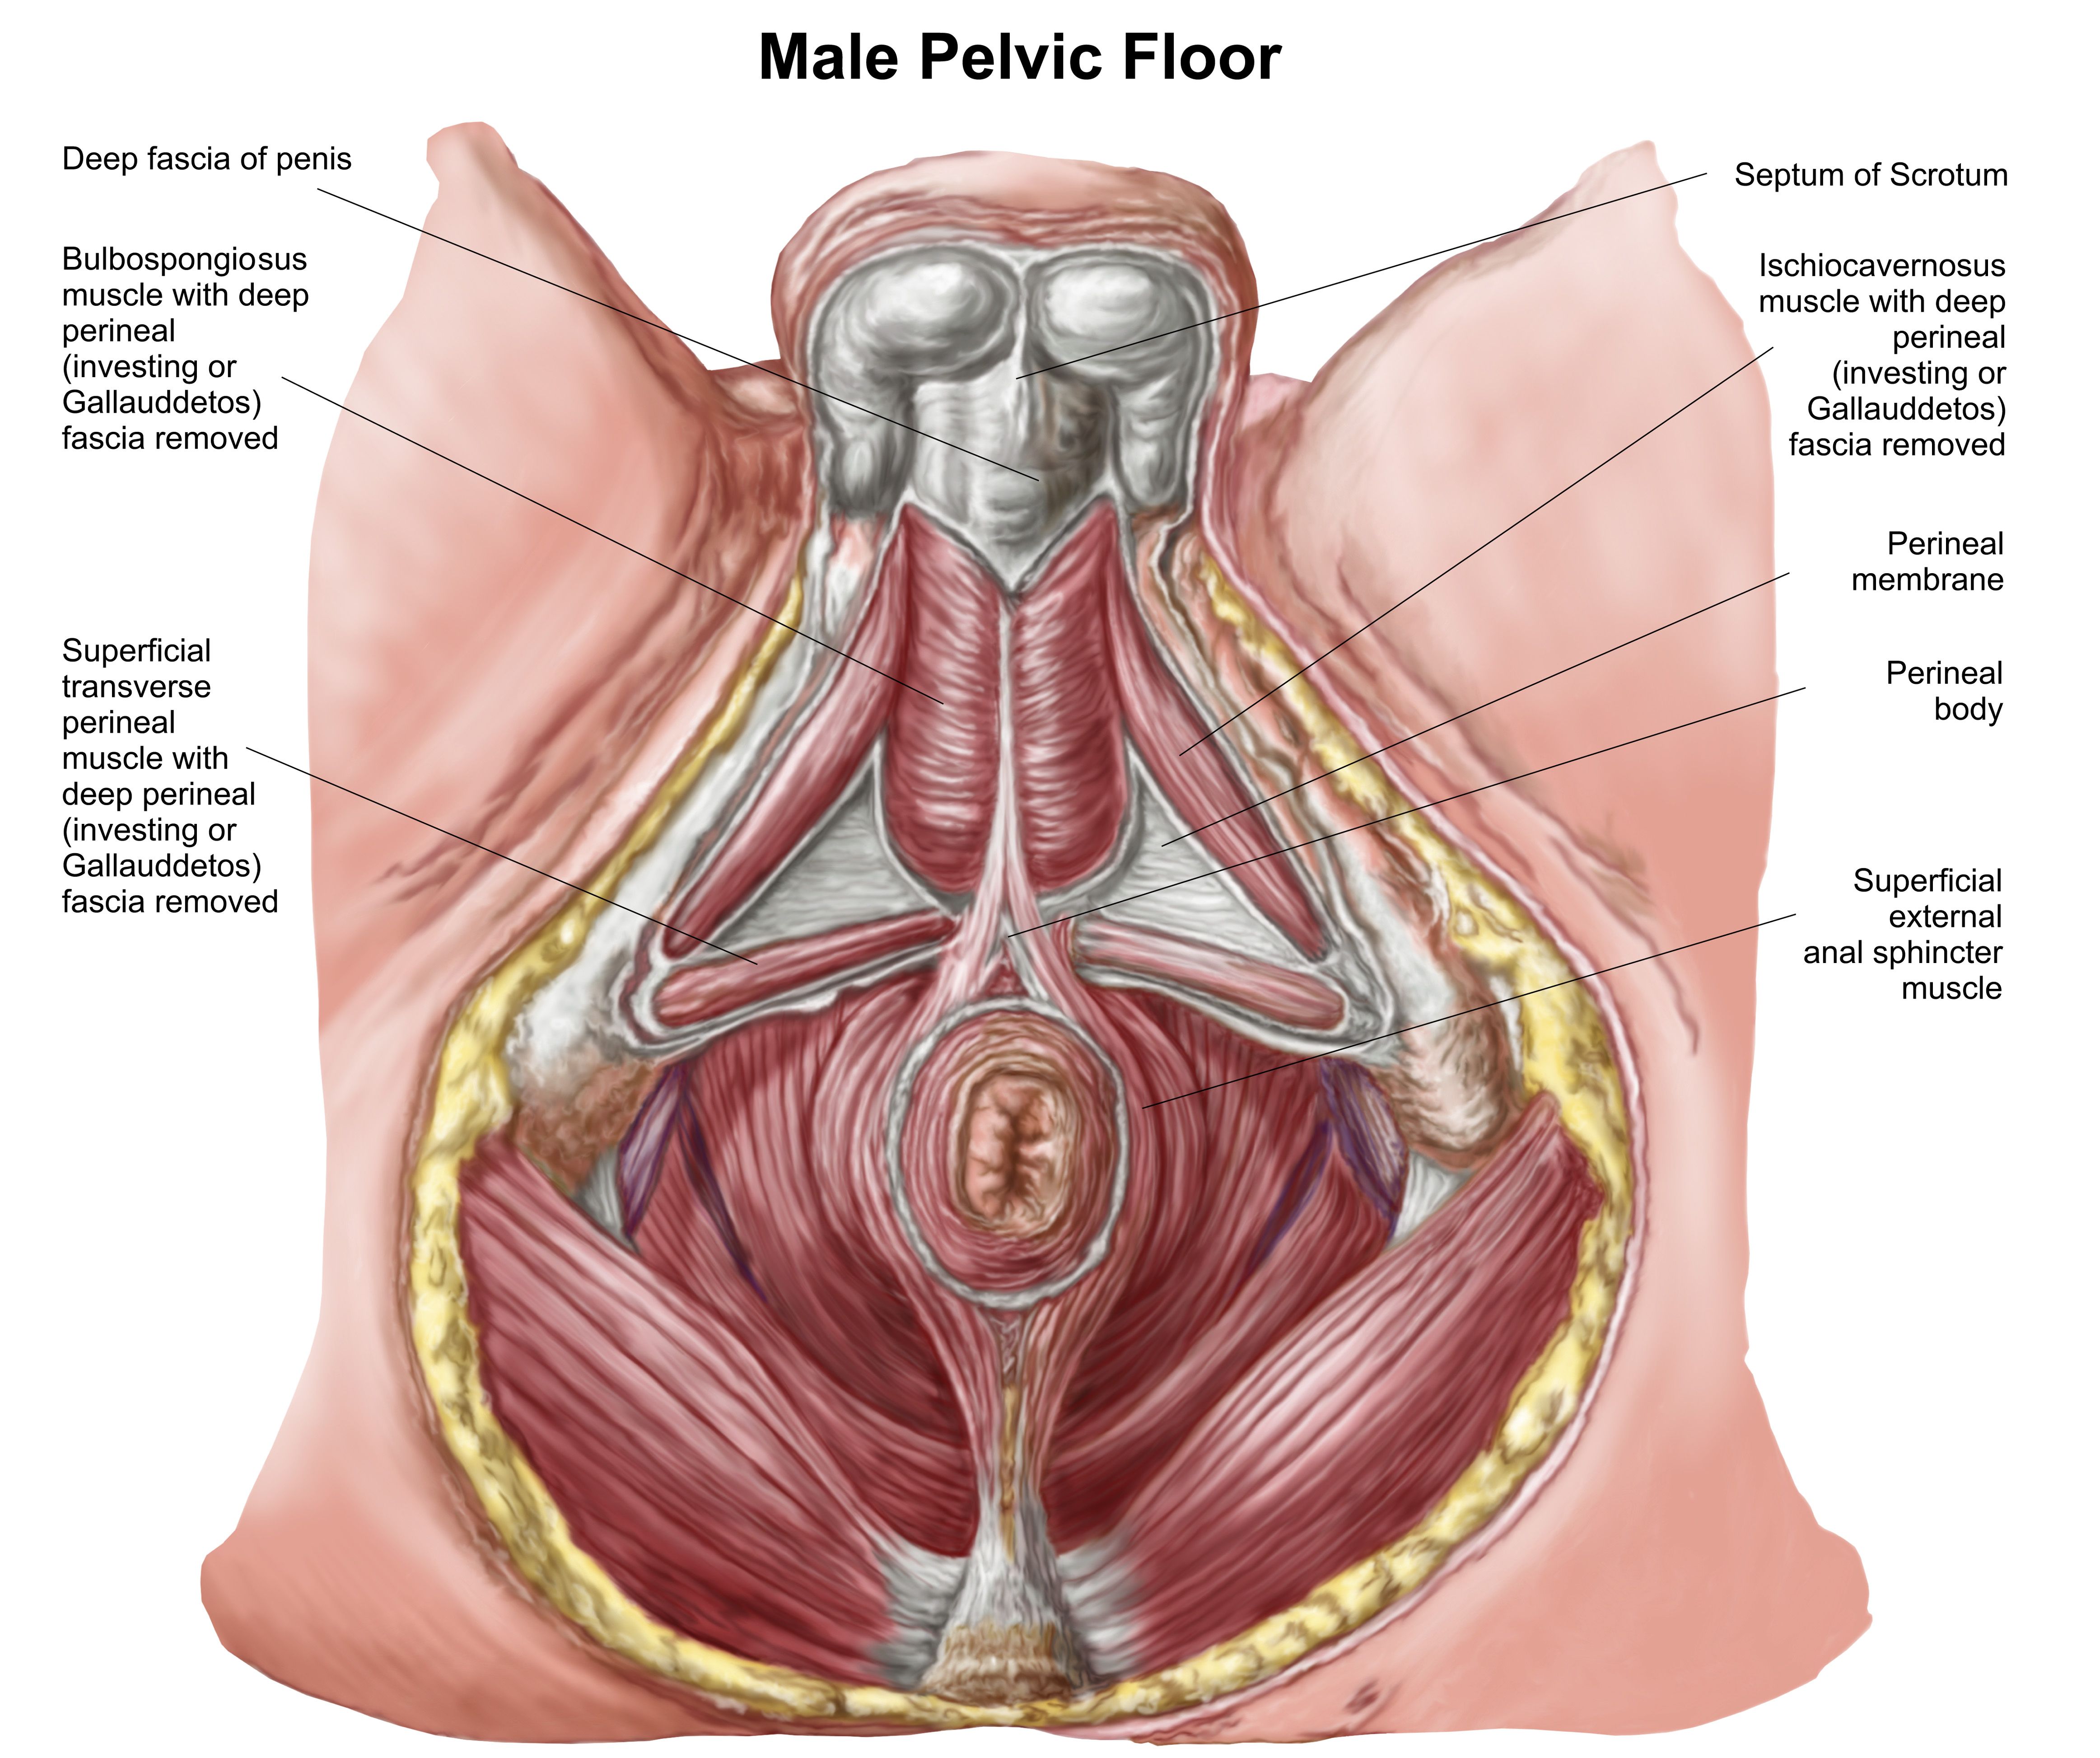 How Men Can Identify and Treat Pain from Pelvic Floor Dysfunction